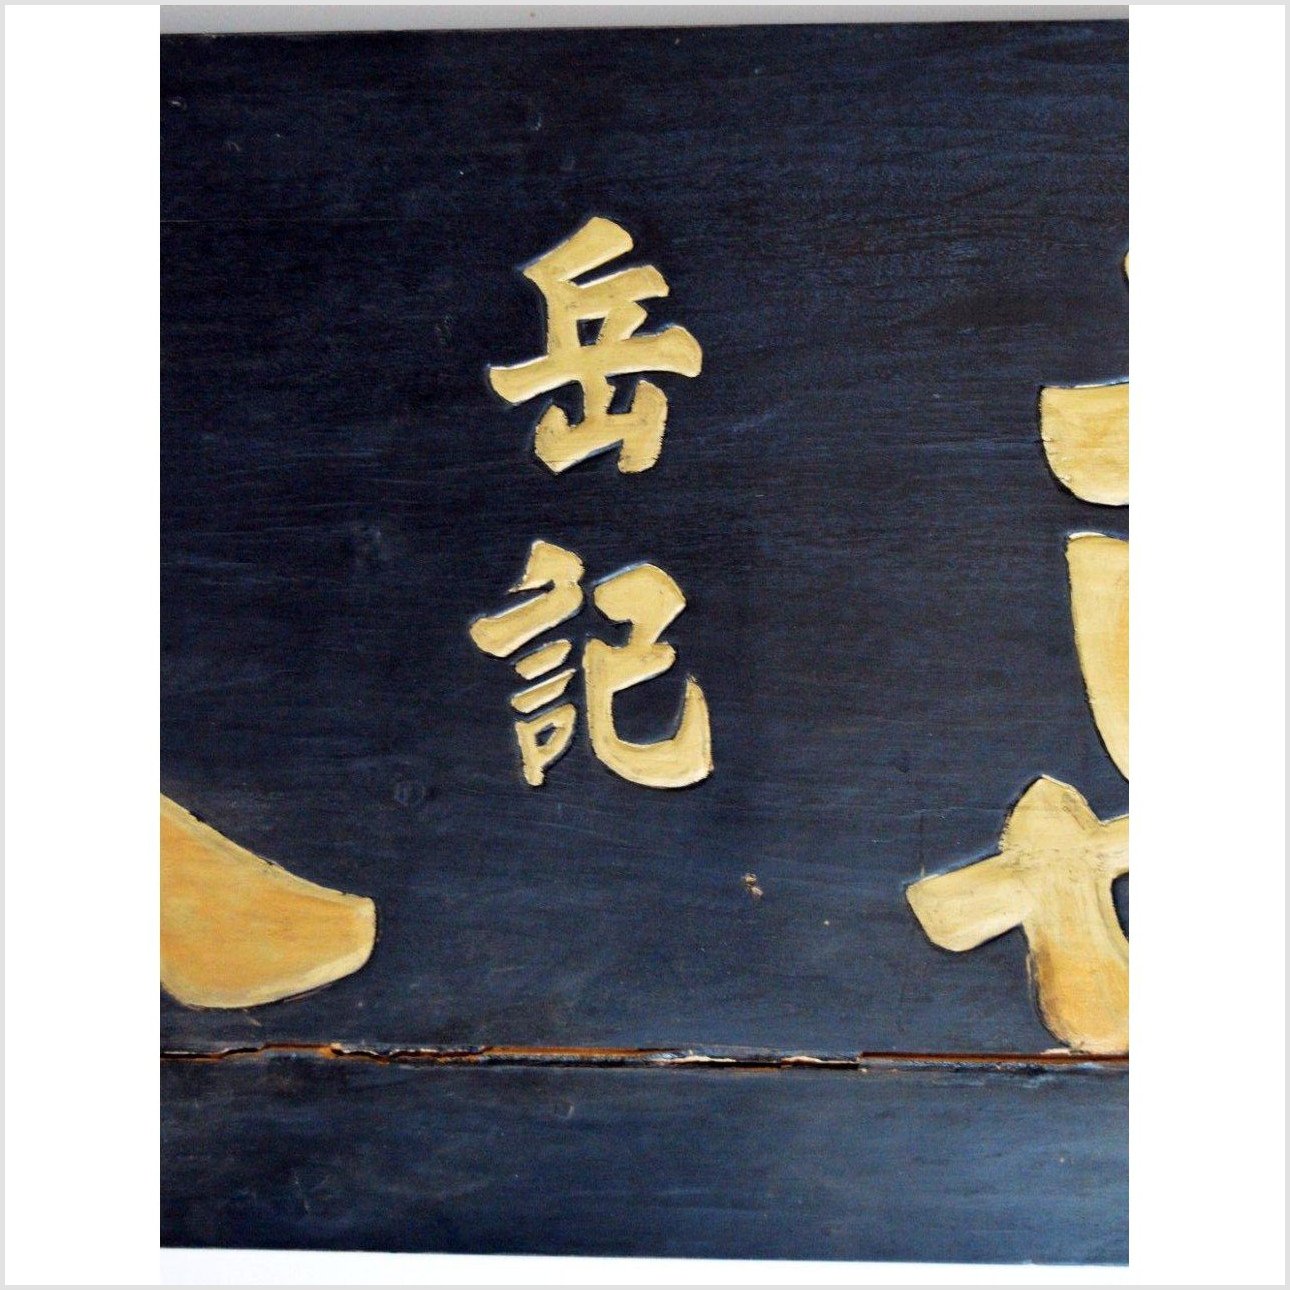 Antique Calligraphy Signage-YN2960-2. Asian & Chinese Furniture, Art, Antiques, Vintage Home Décor for sale at FEA Home